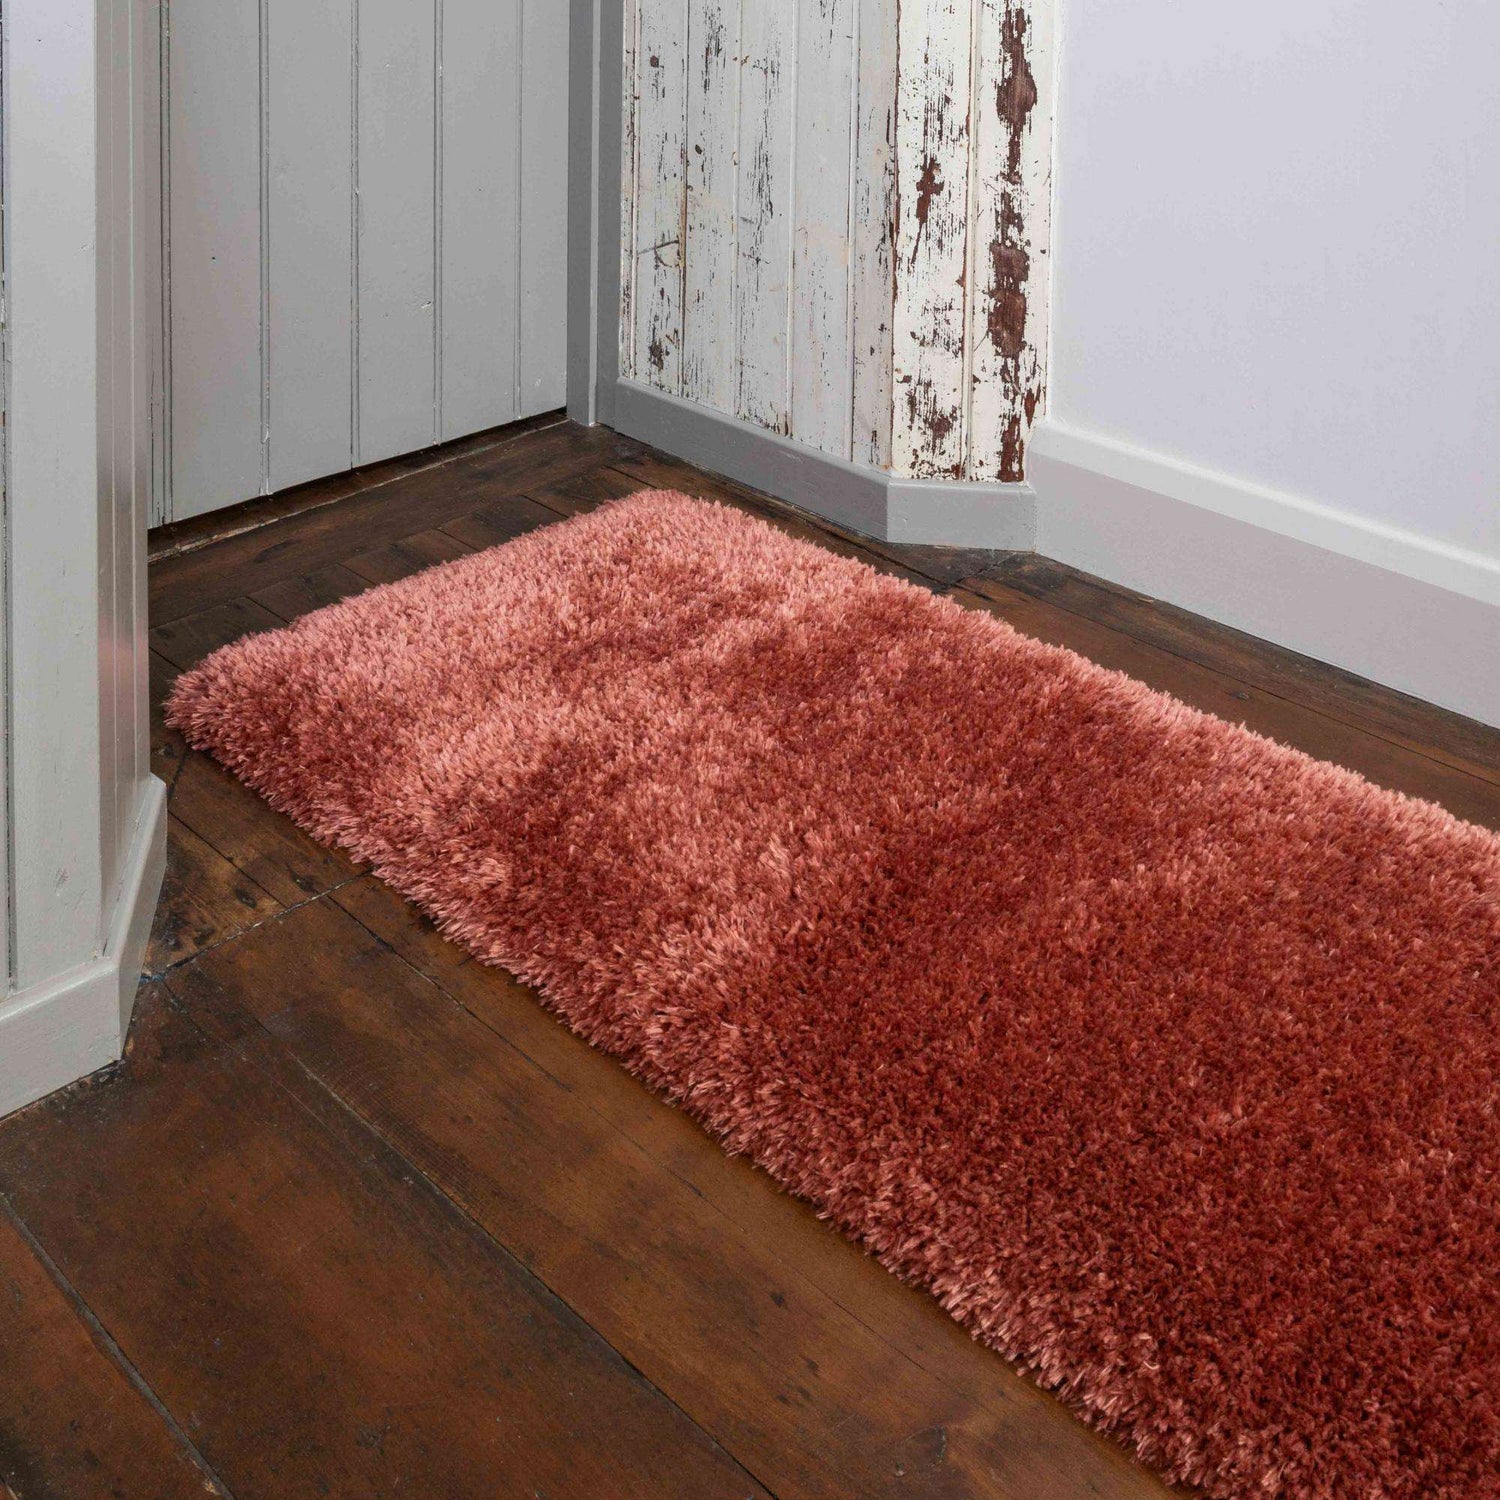 Deluxe Thick Soft Terracotta Shaggy Hall Runner Rug